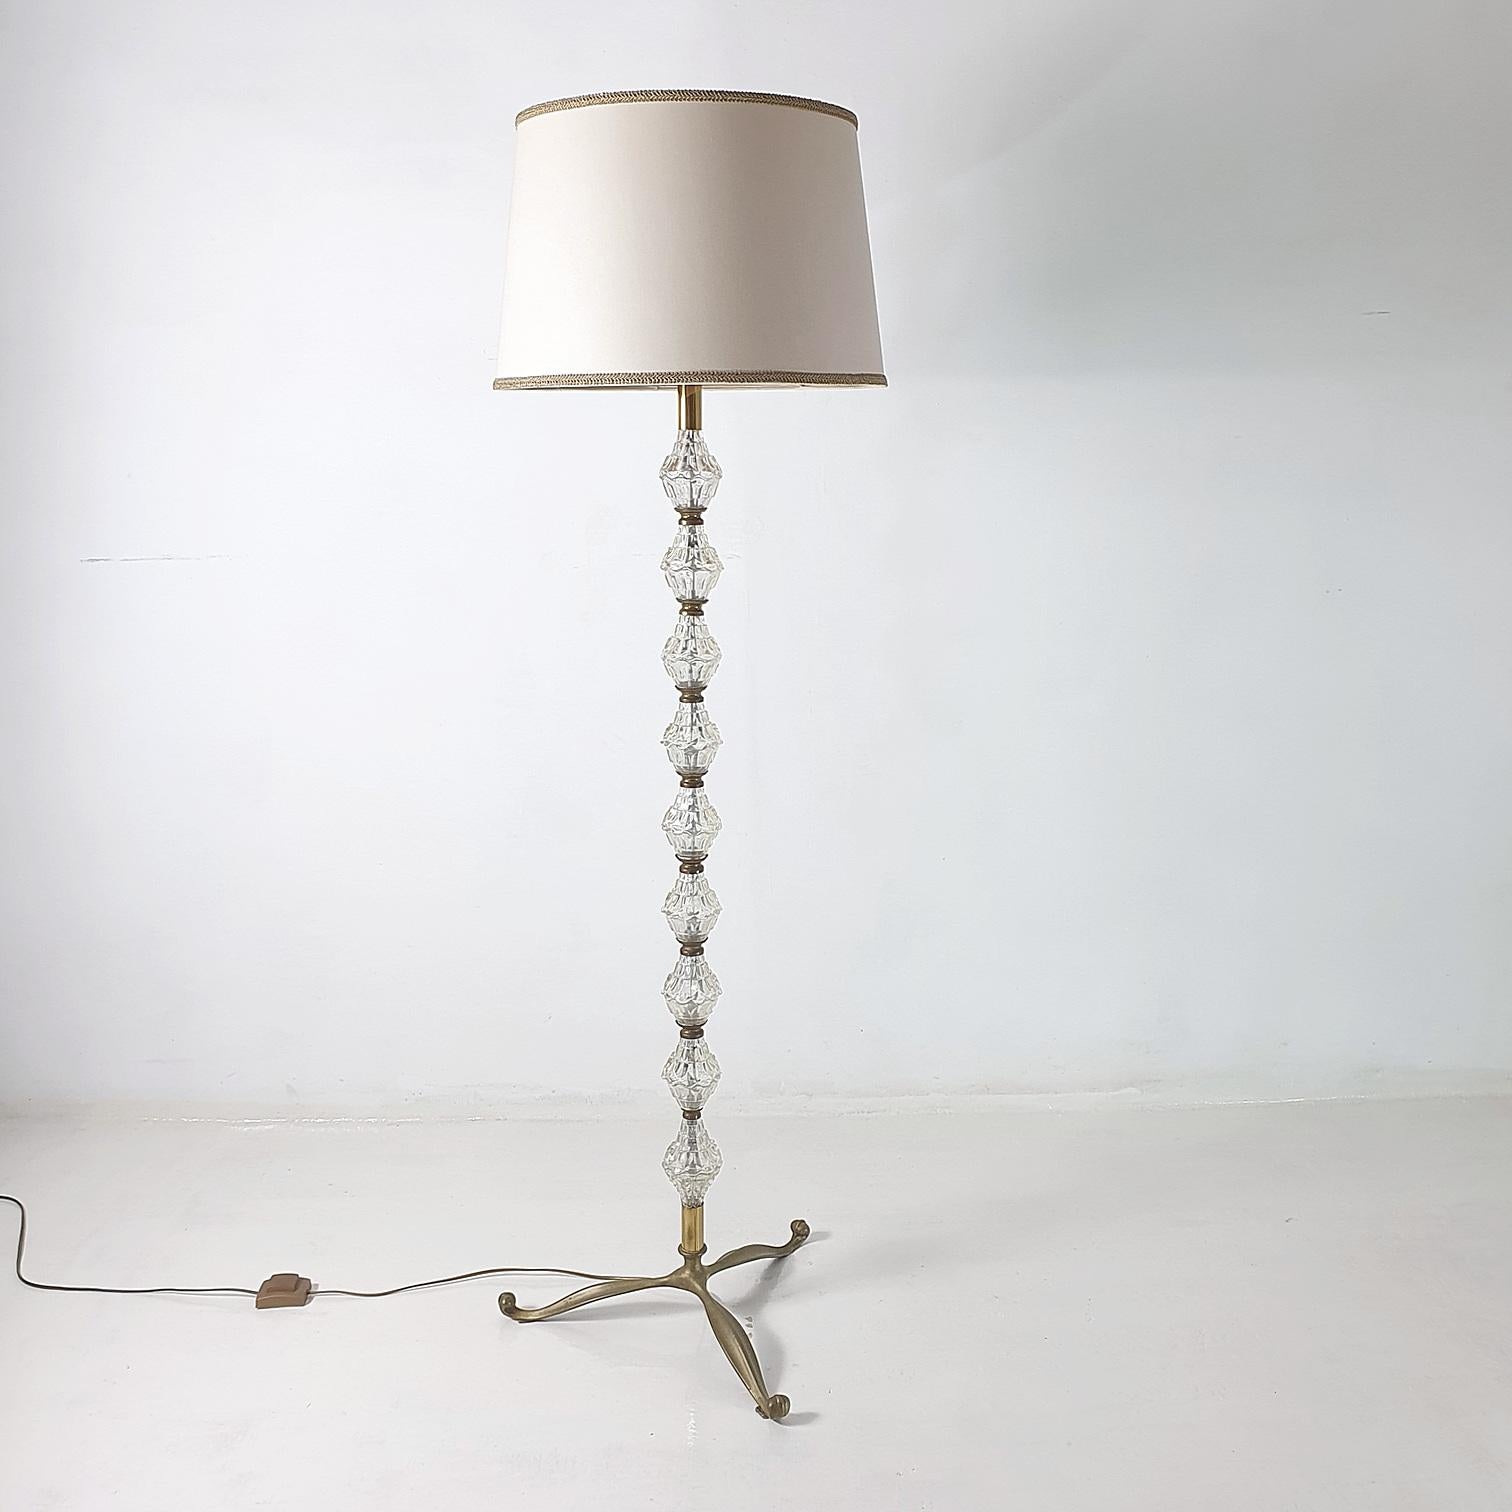 An elegant mid-century floor lamp produced in Italy in the 1950's in glass and metal crowned with an off white lamp shade with gold trimming. The shade is tan colored inside giving a warm glow when lit. Uses an E40 Edison bulb. Wired for European